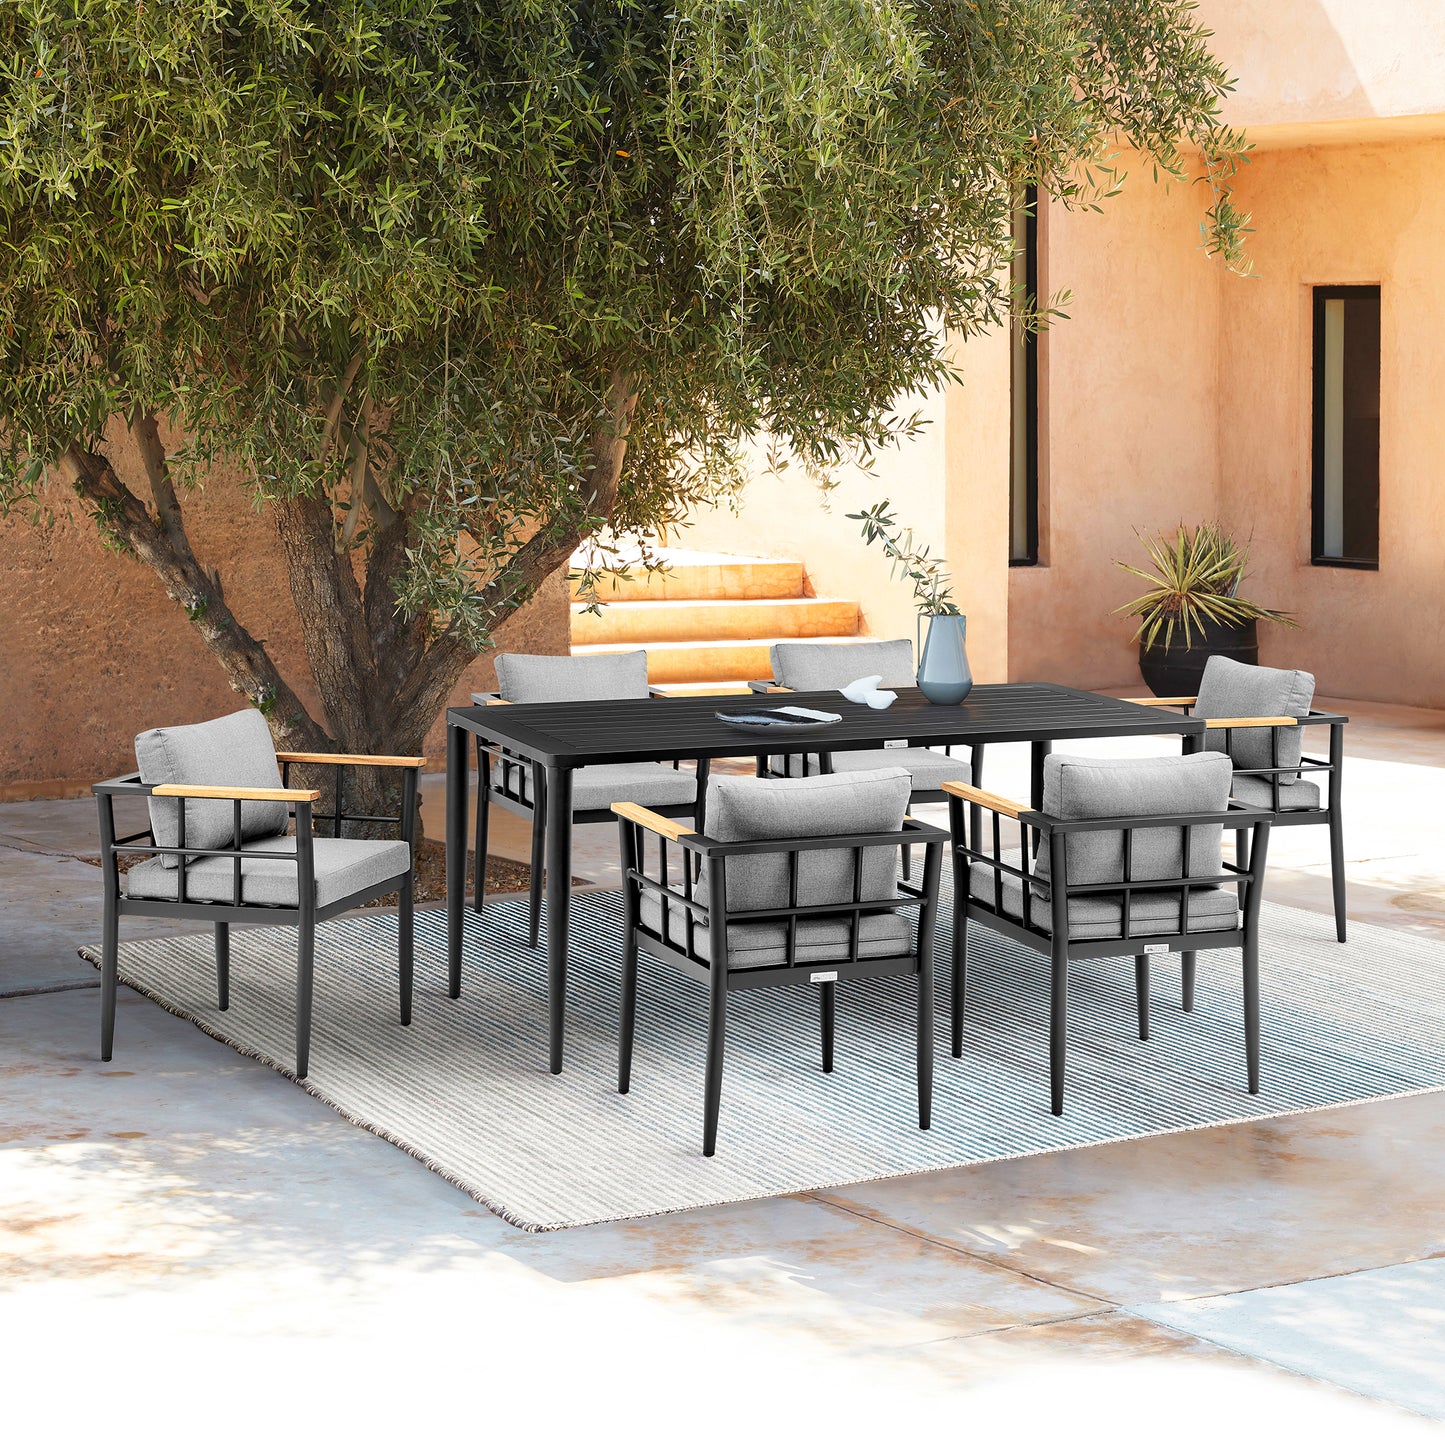 Ezra Outdoor Patio 7-Piece Dining Table Set in Aluminum and Teak with Gray Cushions